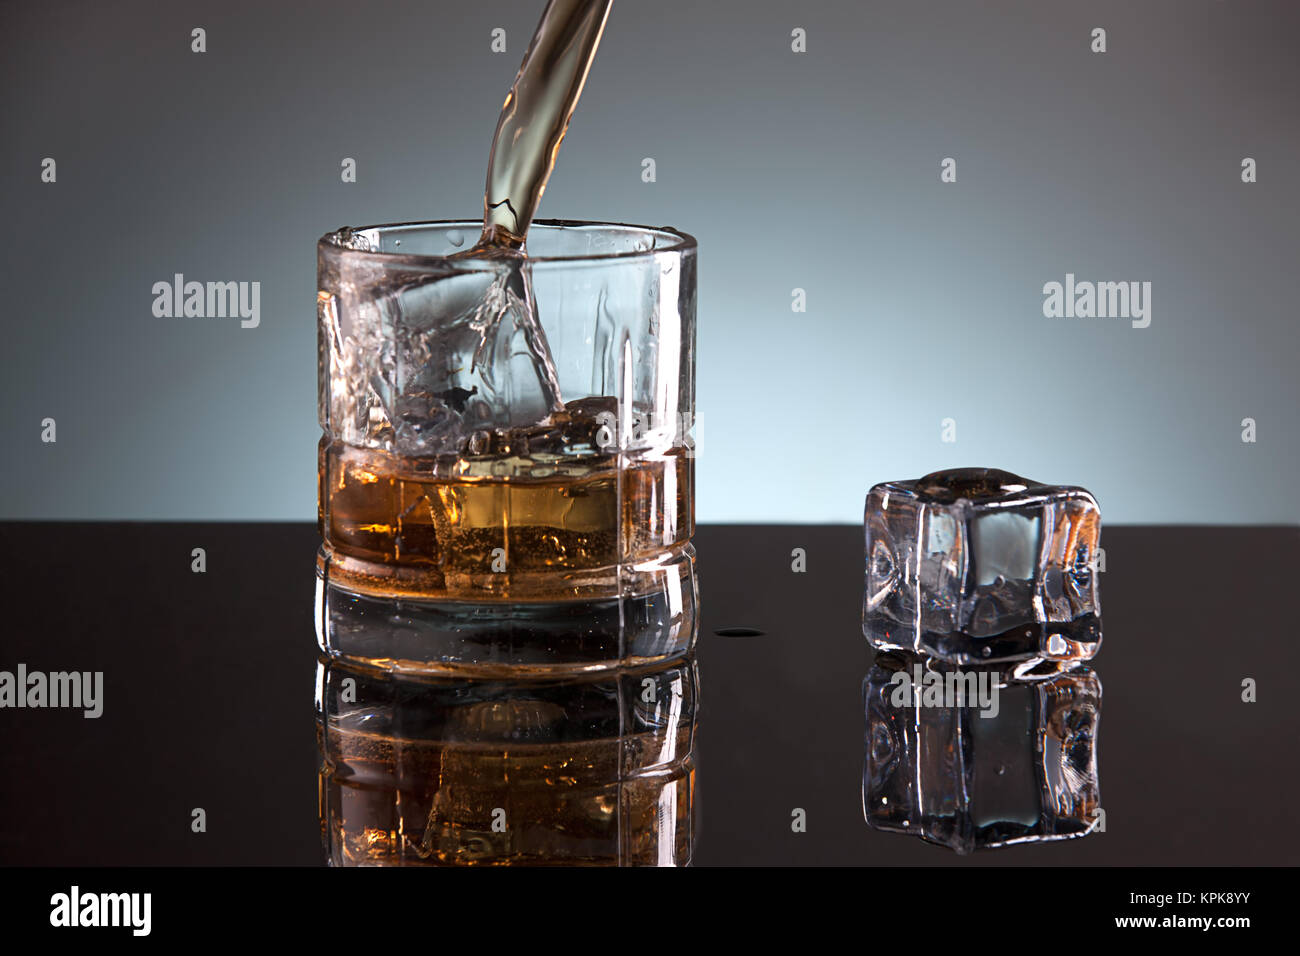 A studio image of a glass filled with ice and liquor. Stock Photo